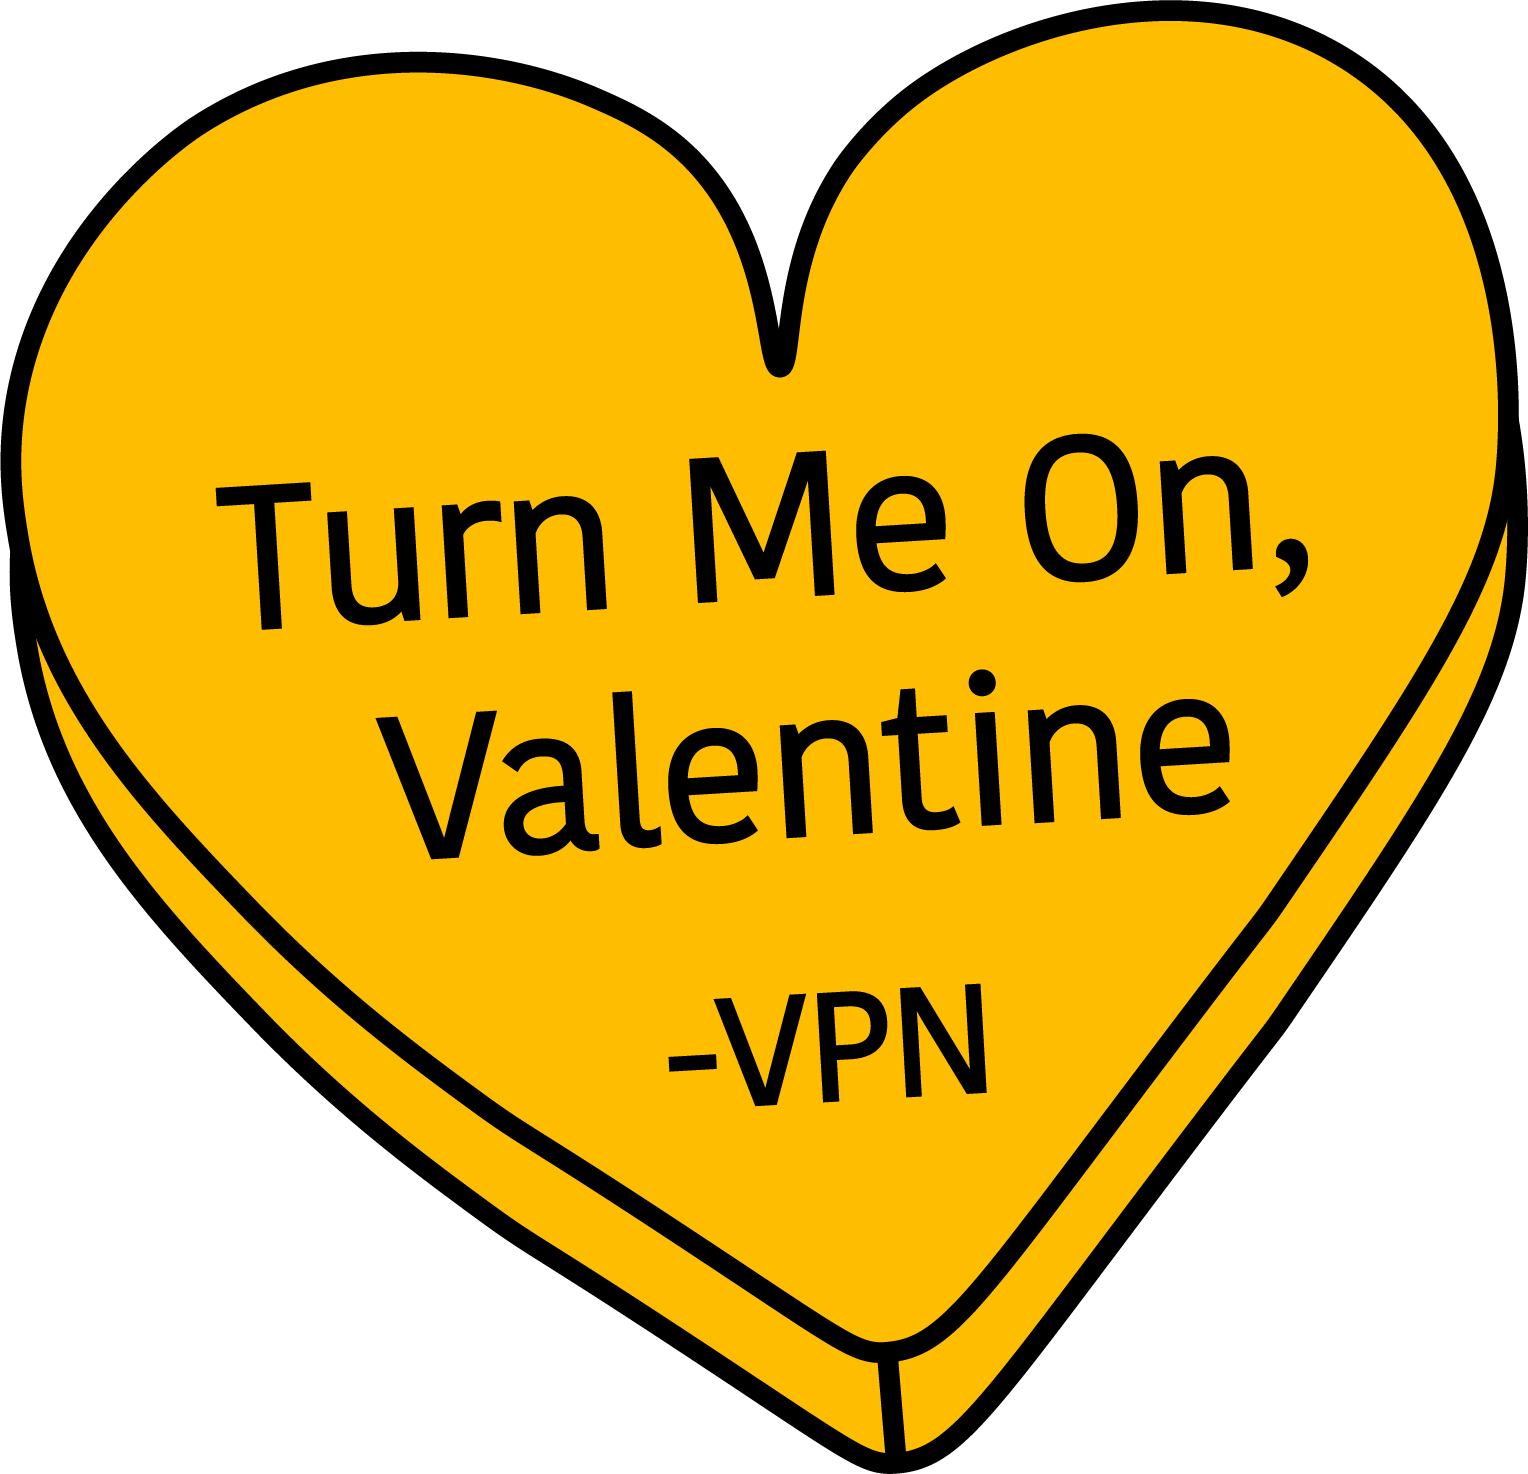 Candy Heart saying, "Turn Me On, Valentine - VPN"